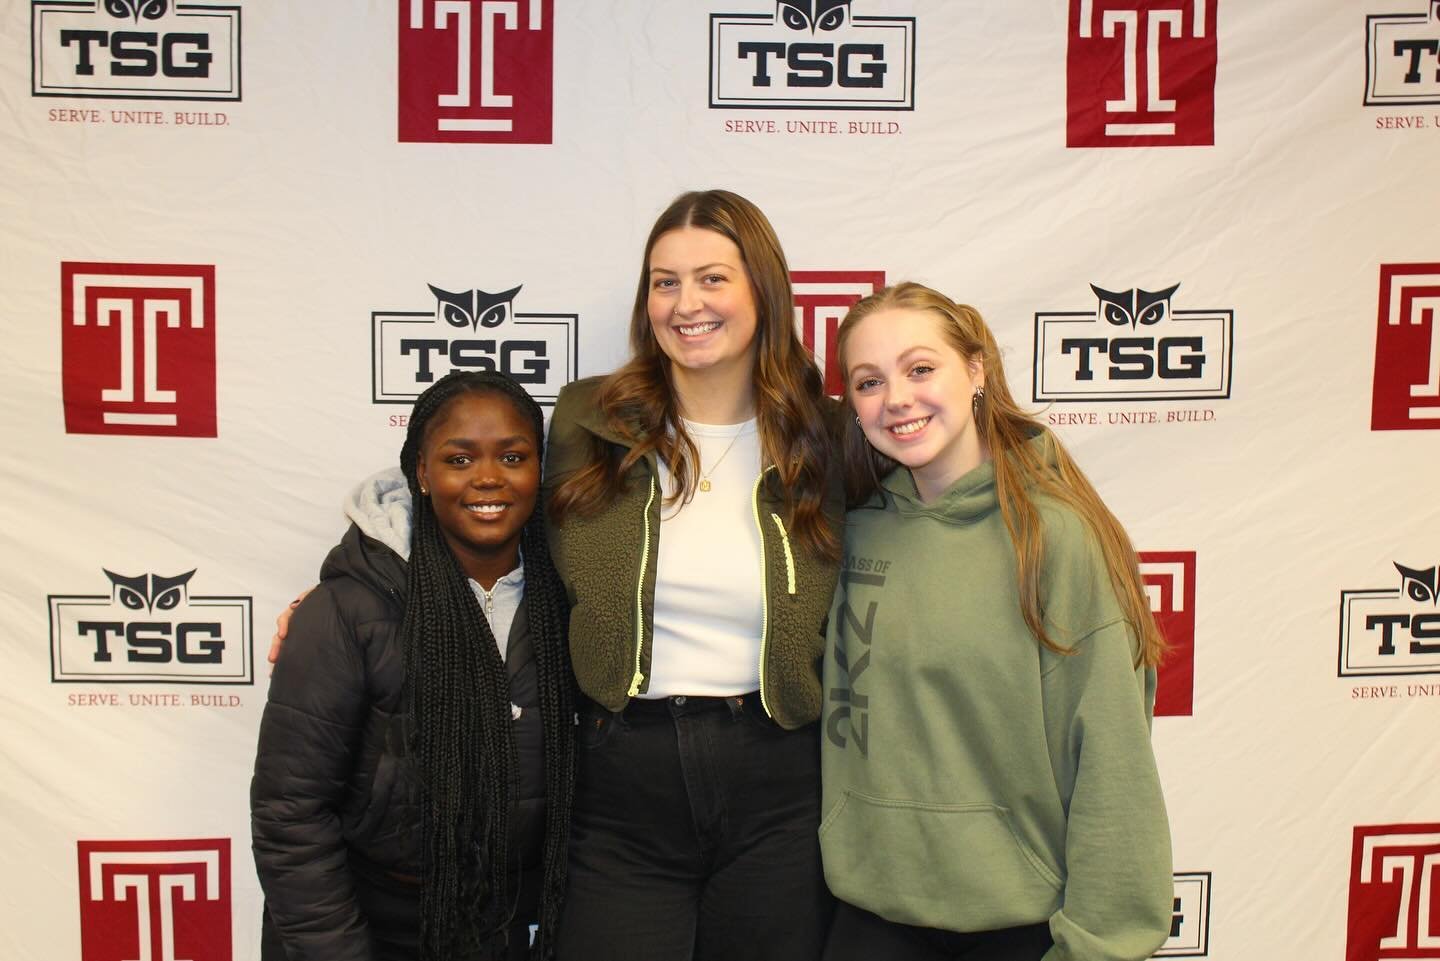 This has been an incredible year for the members of TSG, and we wanted to share some of our best moments before the end of our term! 😍 TSG presents&hellip; TSG in photos! 🦉

#philly #philadelphia #templemade #eagles #gobirds #community #engagement 